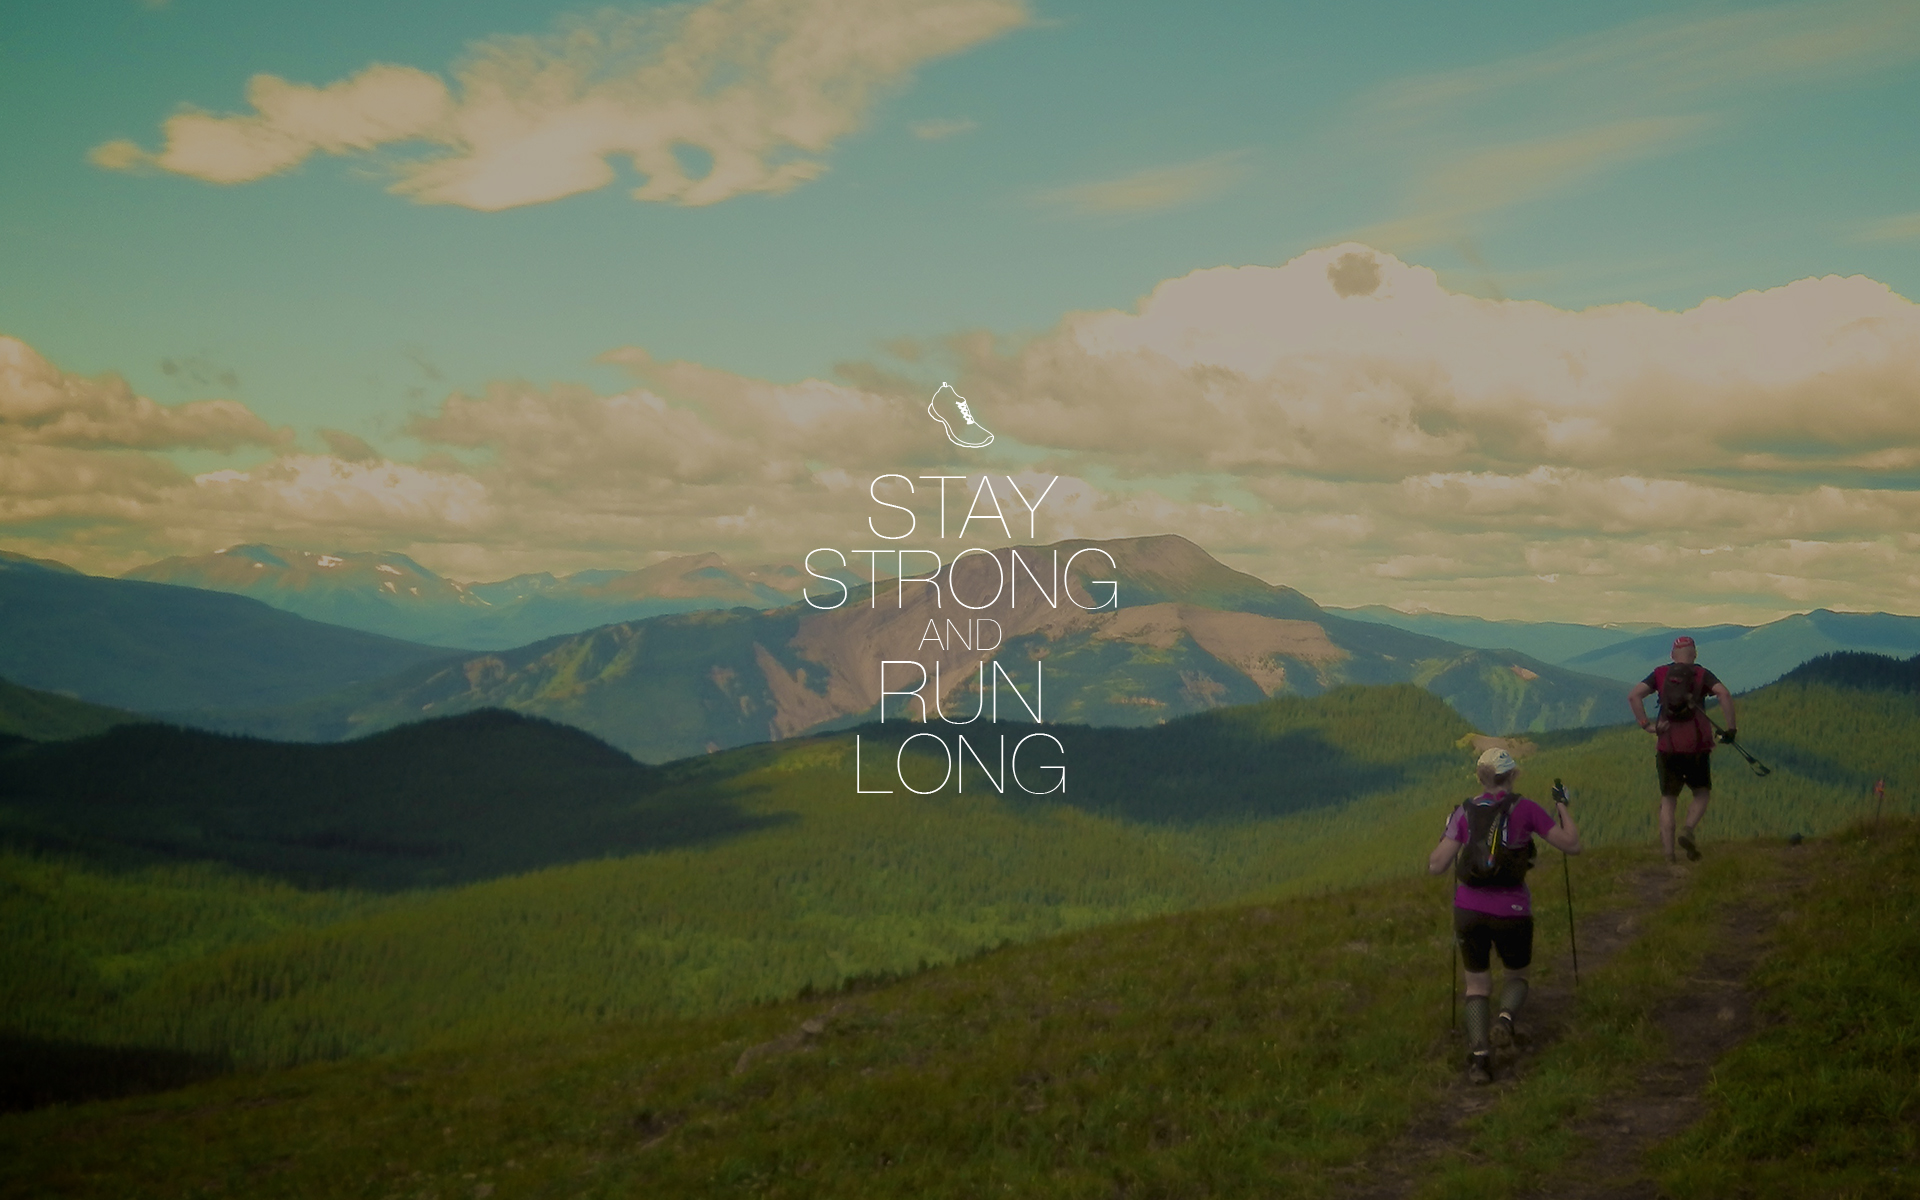 Saucony Running Wallpaper Stay Strong And Run Long